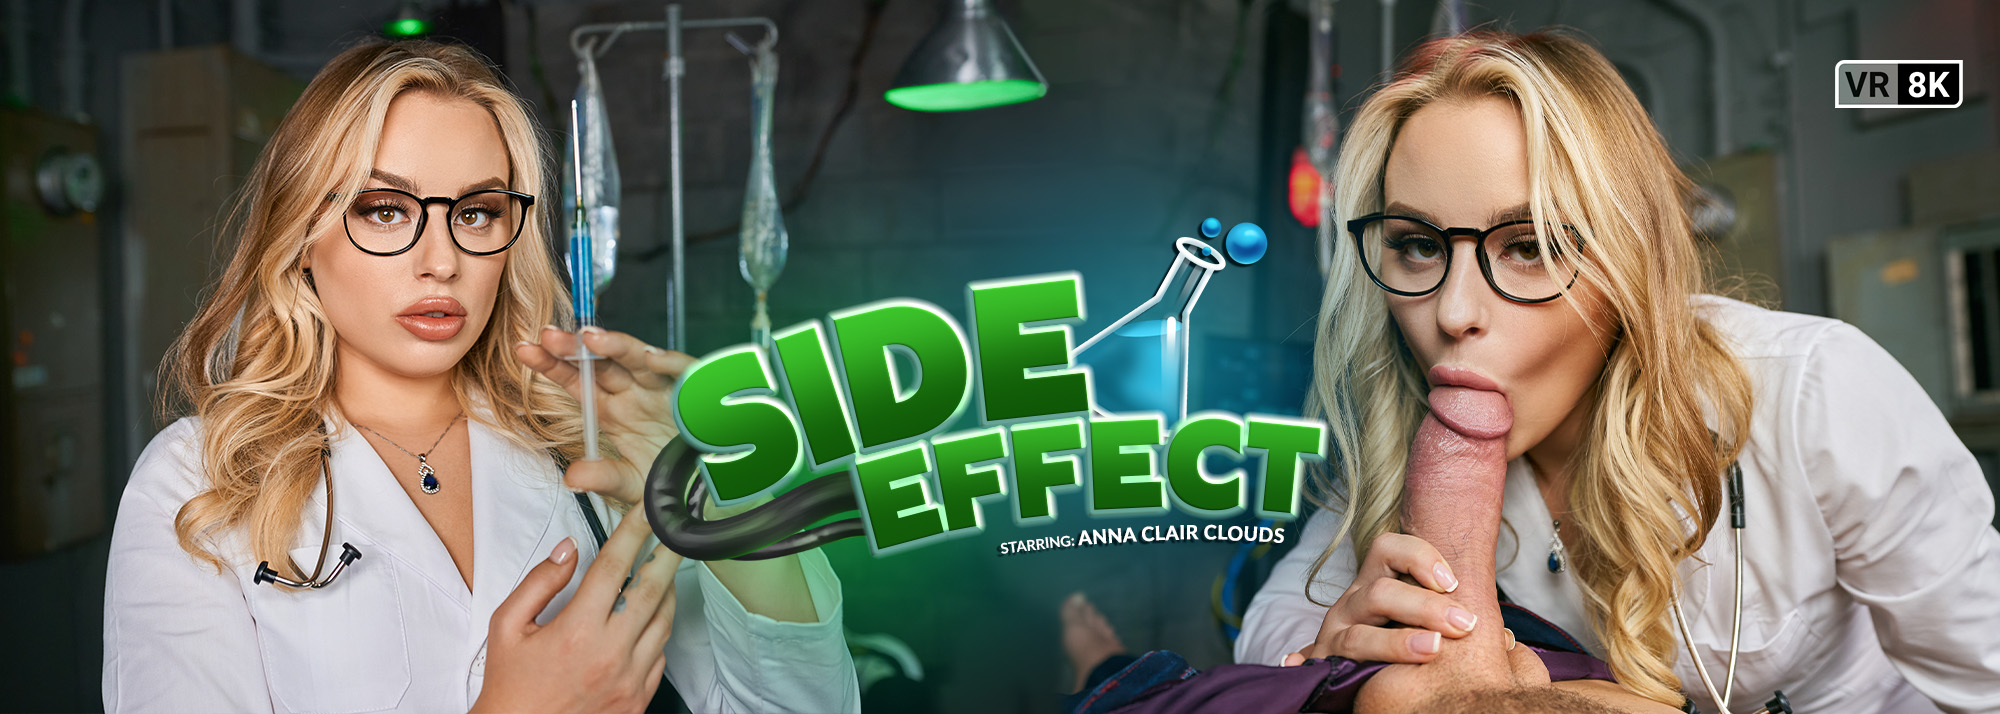 Side Effect - VR Porn Video, Starring: Anna Claire Clouds